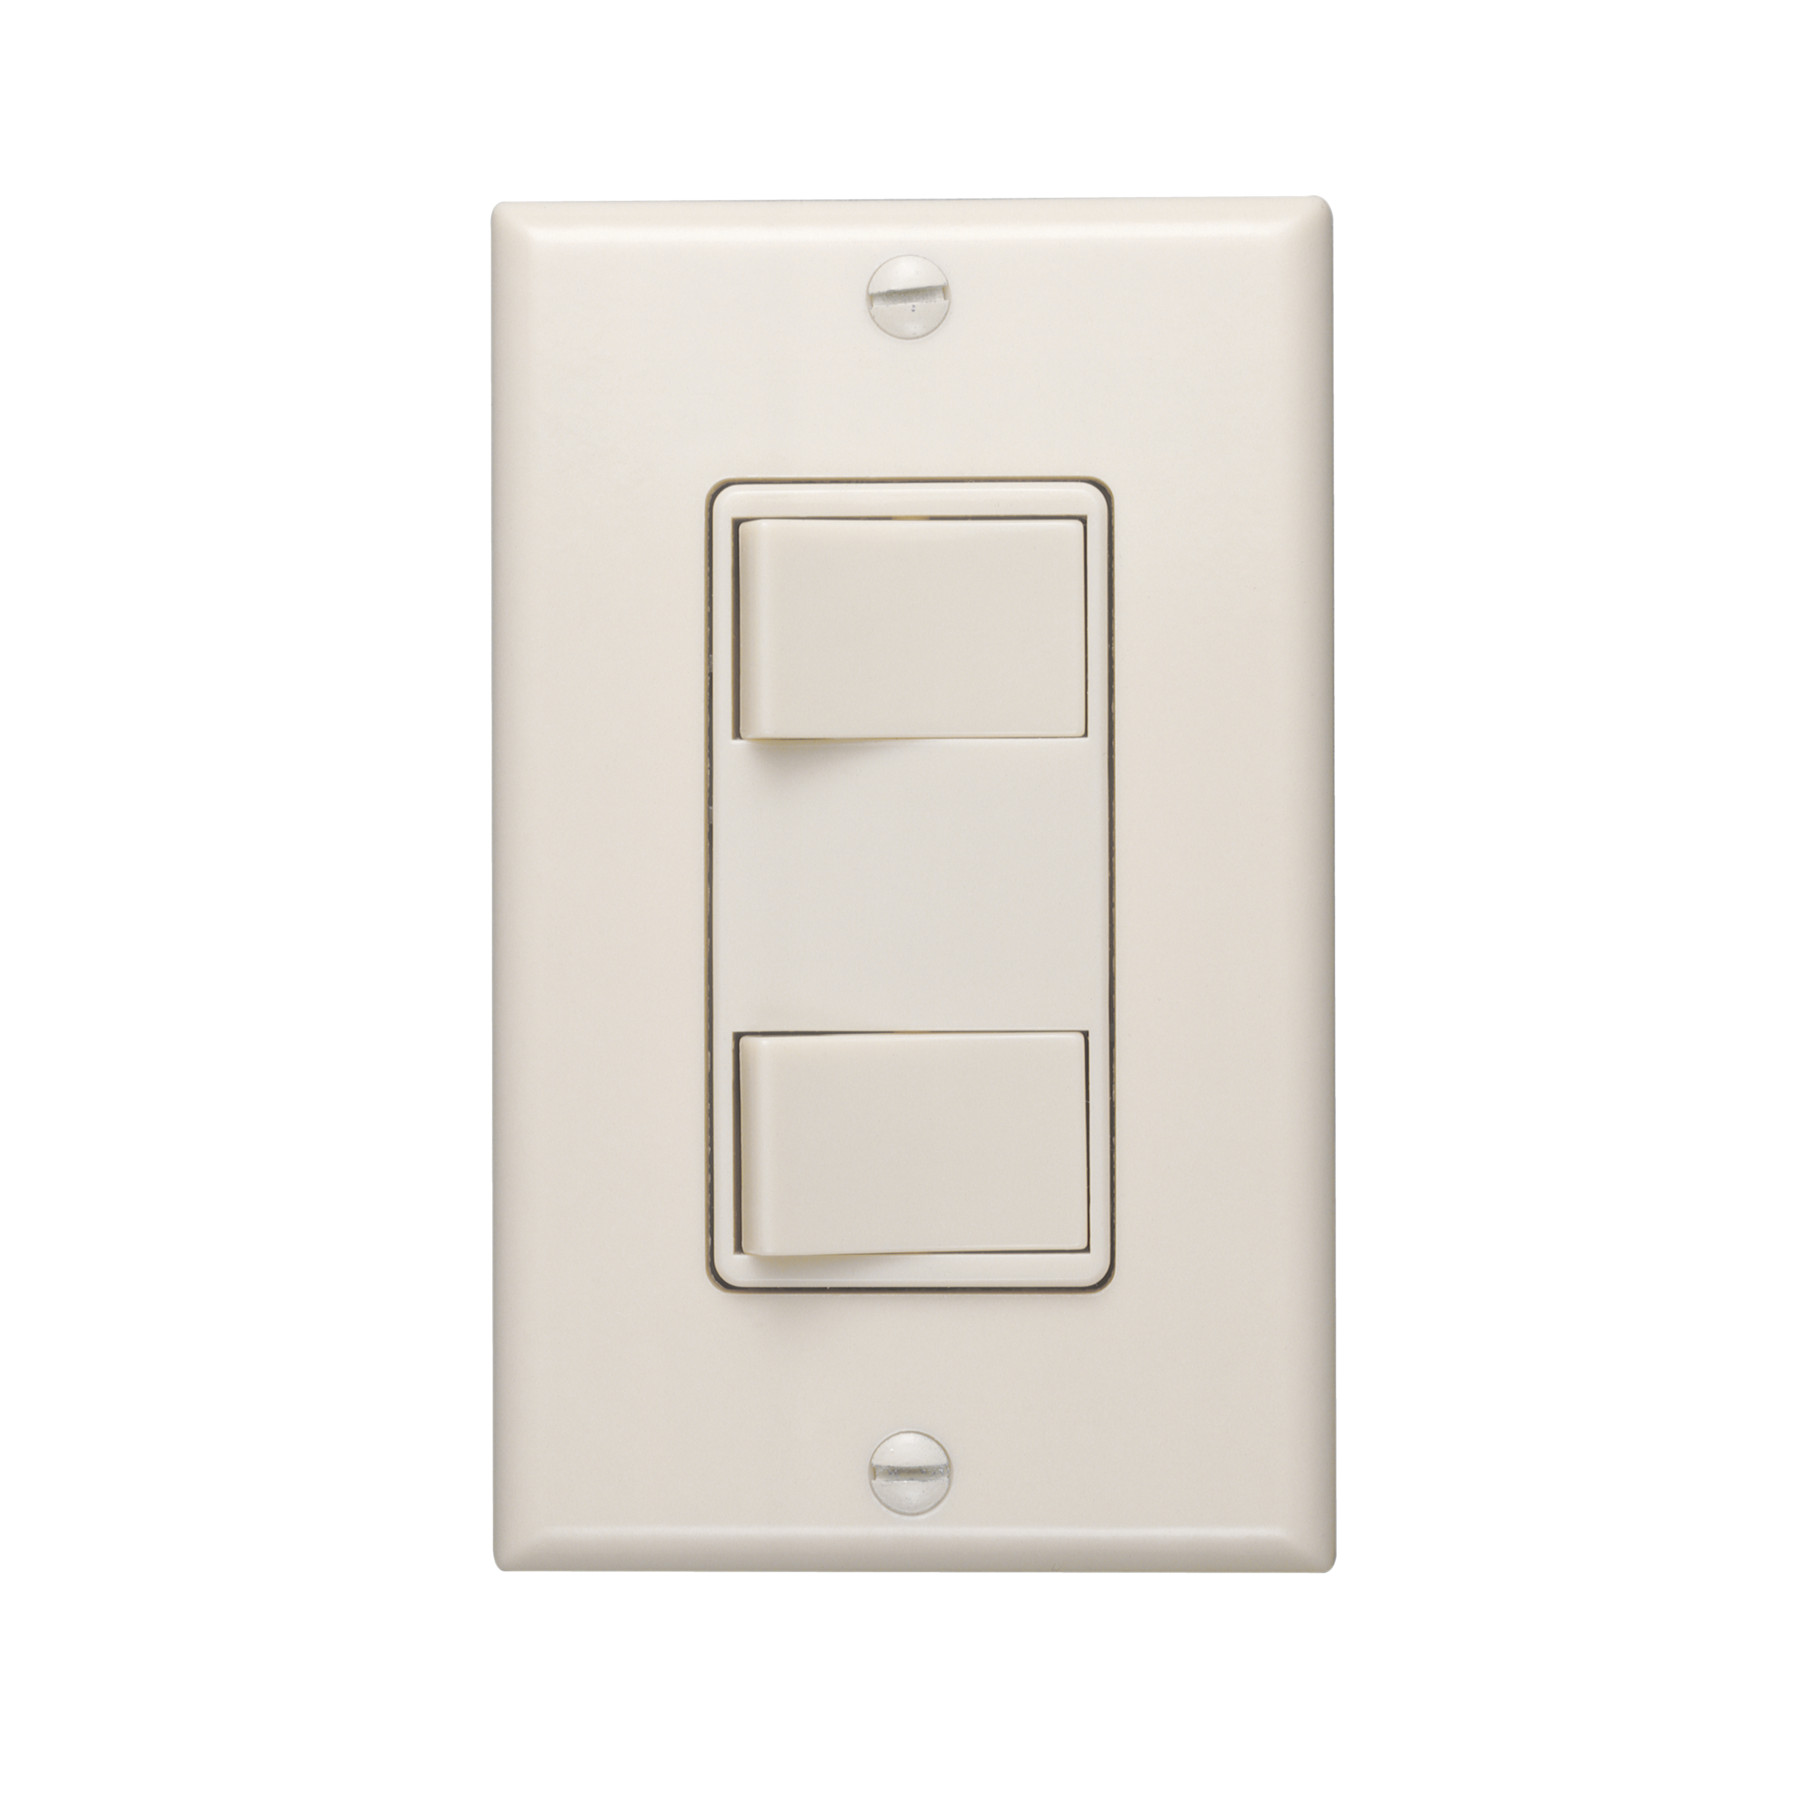 **DISCONTINUED** Broan-NuTone® 120V 2-Function Controls, Ivory **DISCONTINUED**